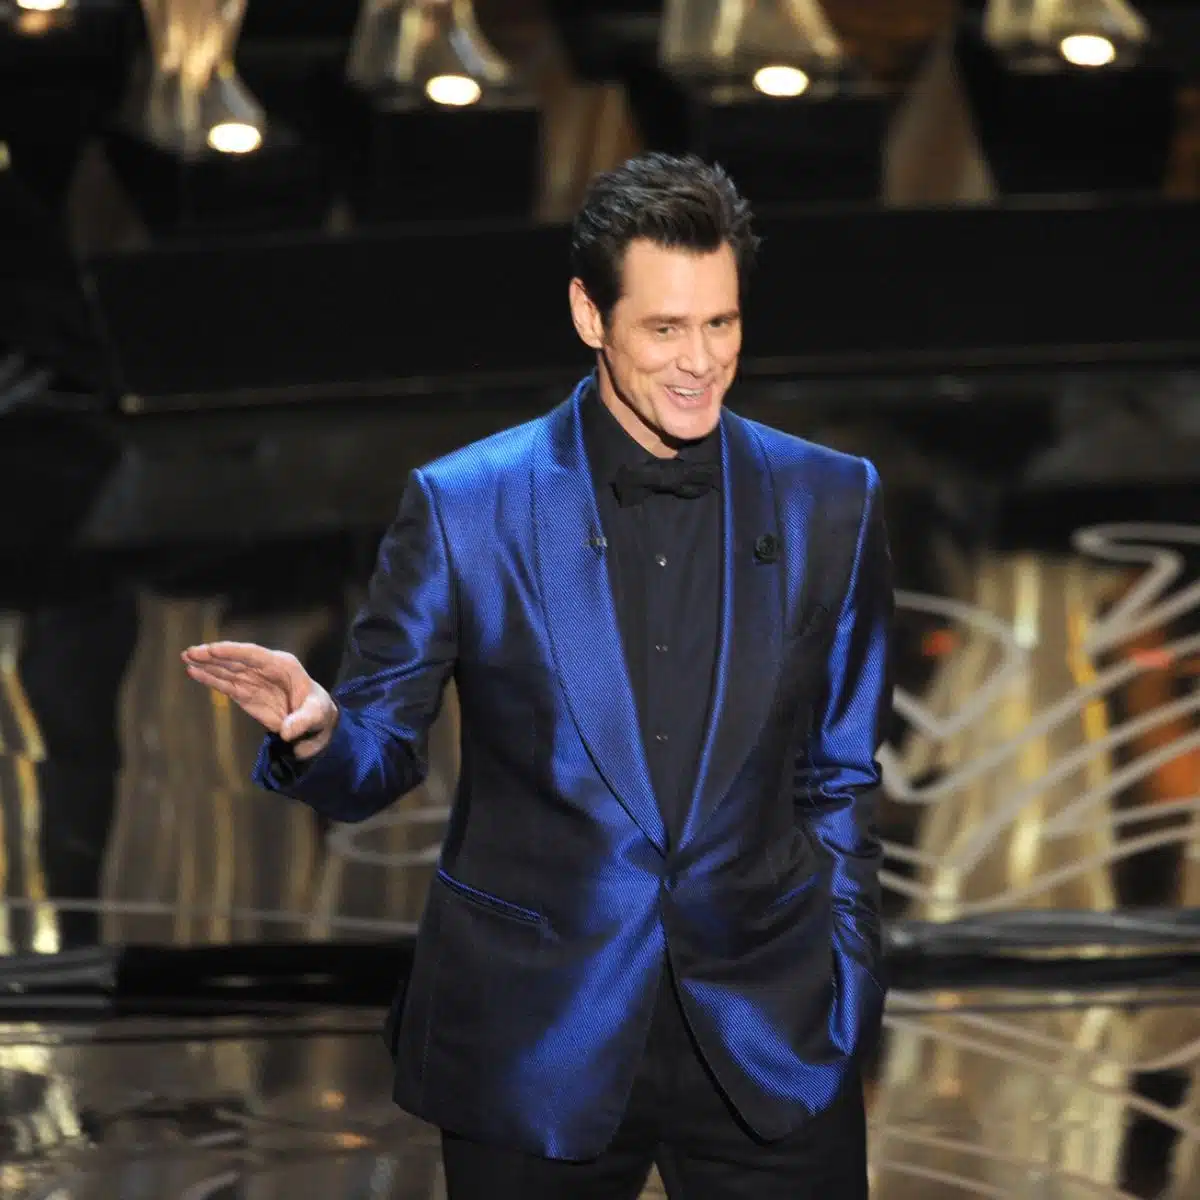 Jim Carrey escorted out by security at the Golden Globes 2019